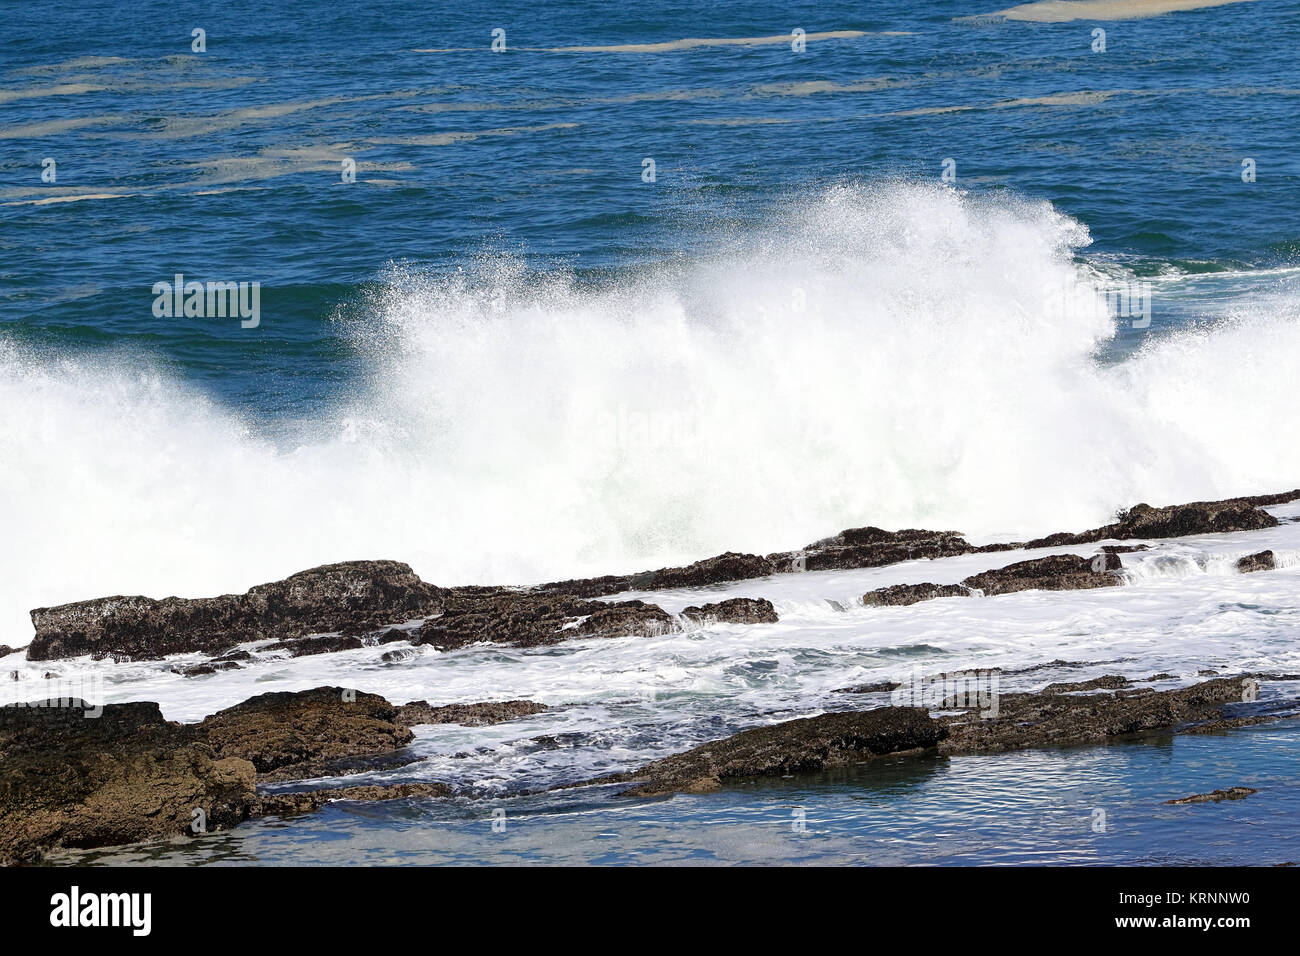 A big wave crashing into the rocks in the rough wild water of the ocean on a stormy during wintertime in South Africa. Stock Photo